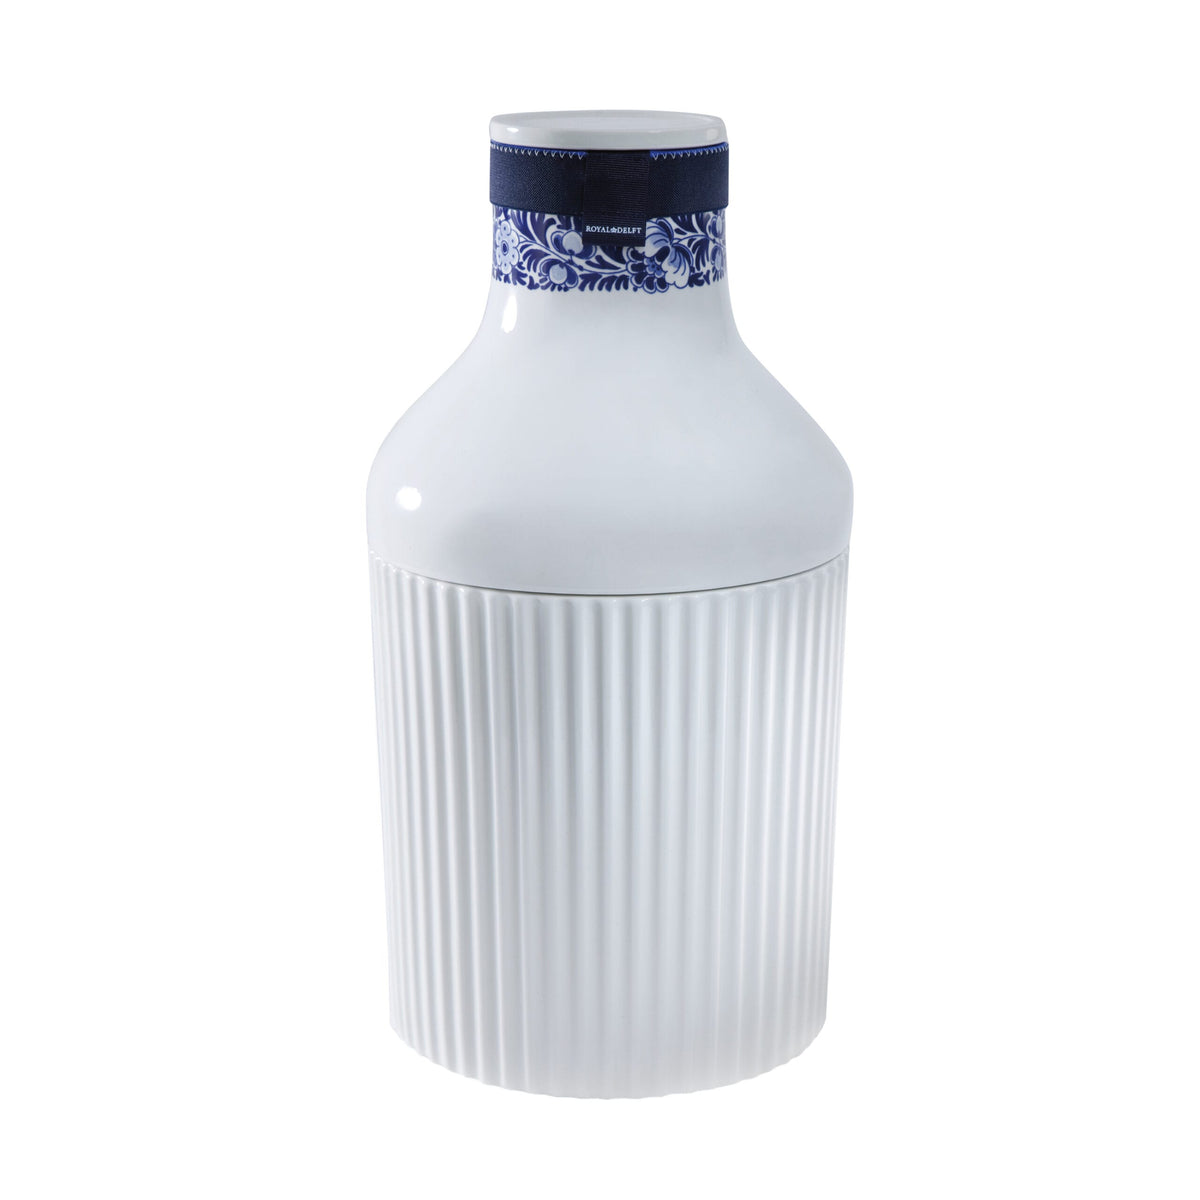 Collar Bottle no. 1 - Blue D1653 Collection by Royal Delft